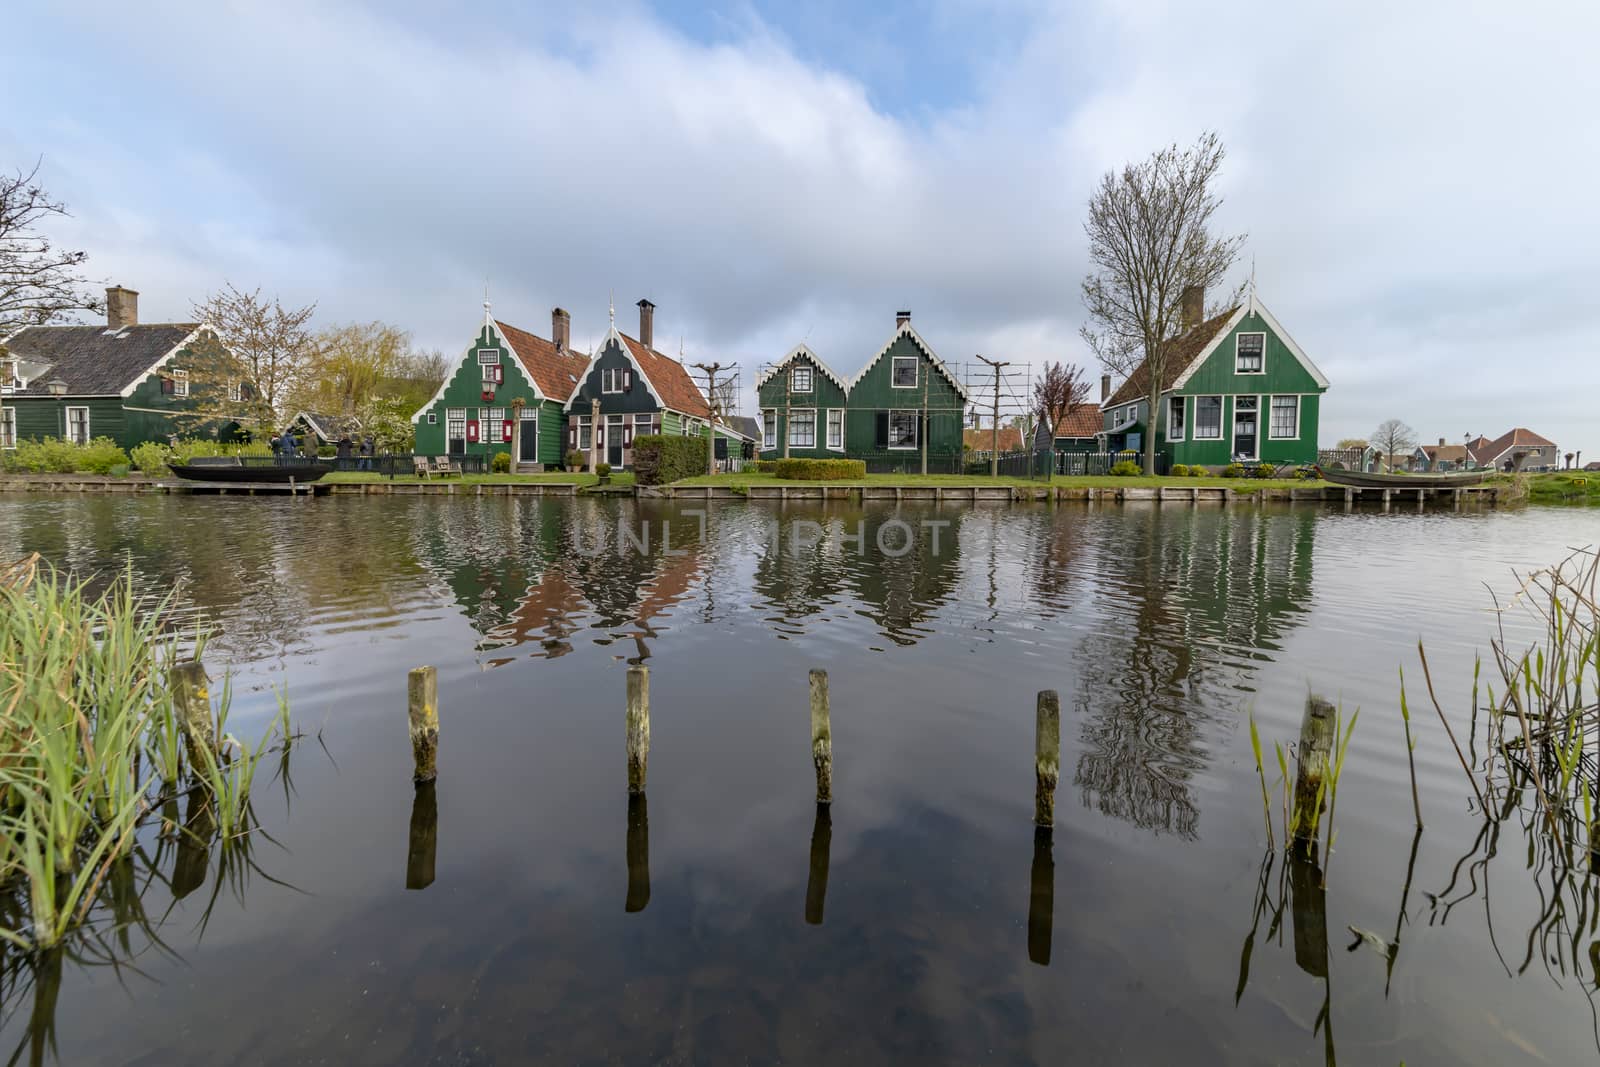 View of a reflection of the wooden green houses topped with dark orange color roof reflected on the calm water of the canal from the opposite side of the canal